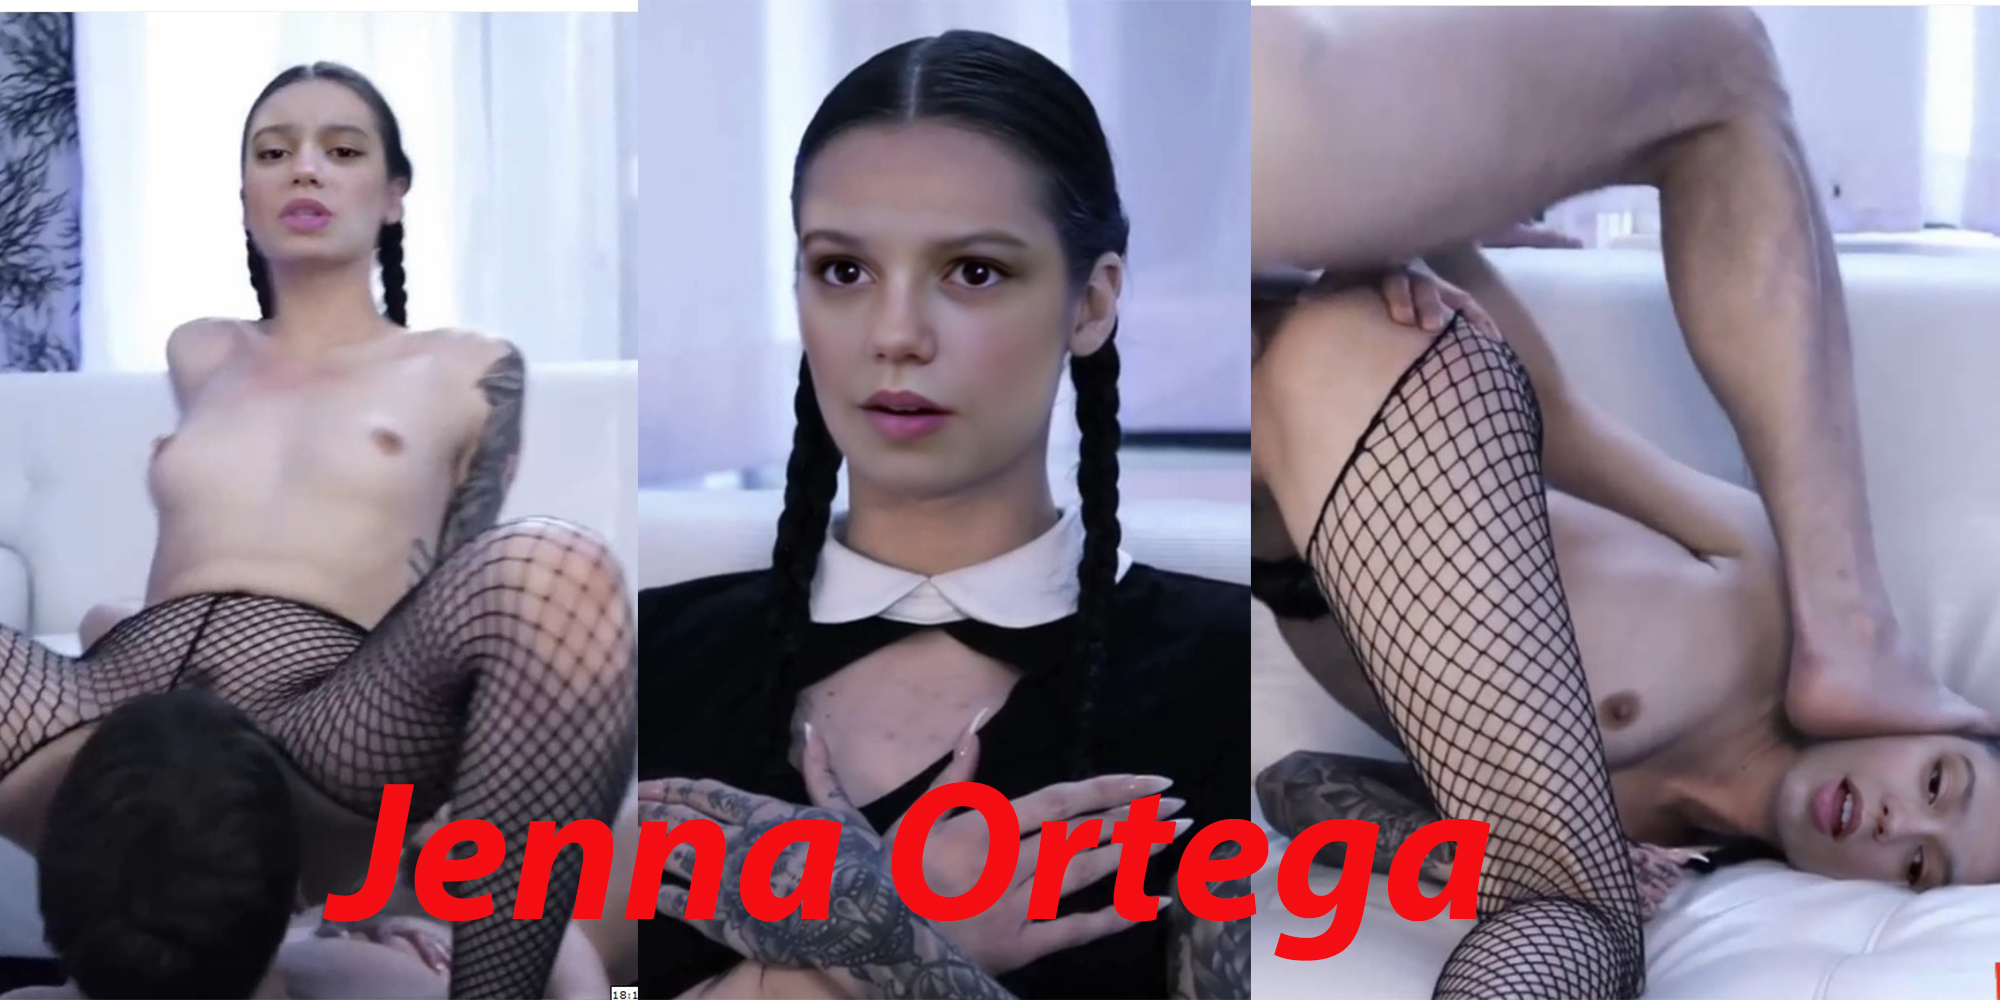 Jenna Ortega tries out her new role as Wednesday (full version)